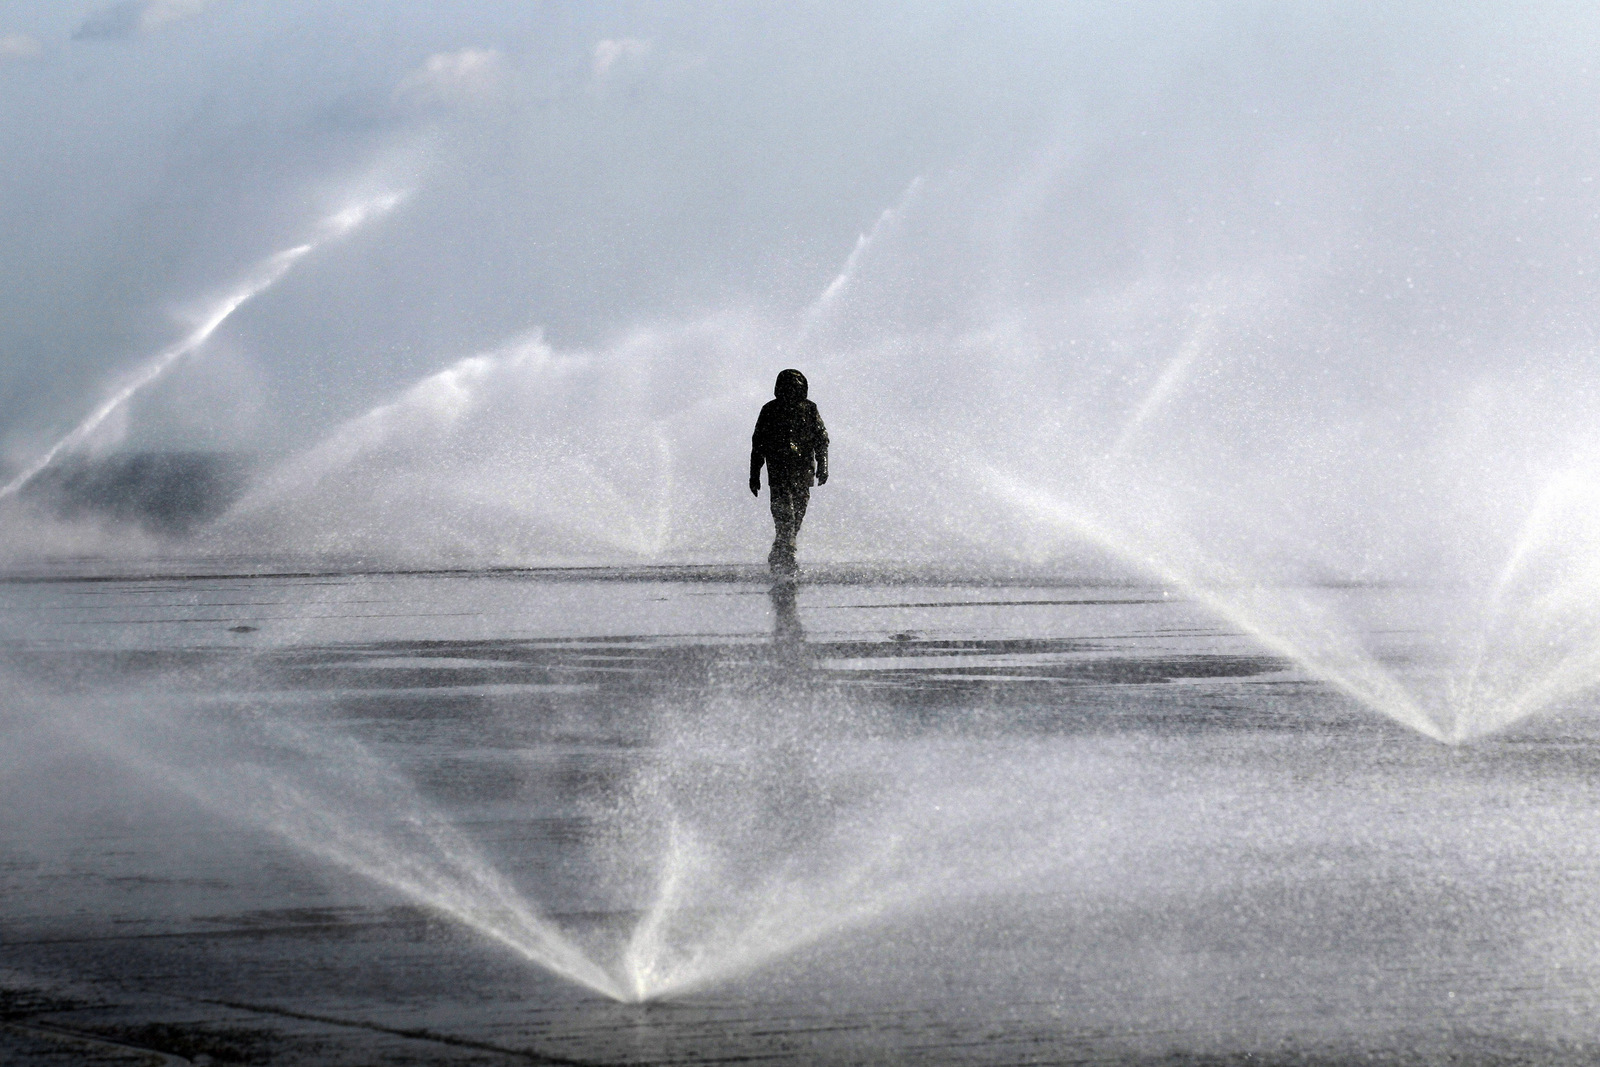 A flight deck crew walk on the flight deck where water is sprayed for radioactive decontamination aboard the aircraft carrier USS Ronald Reagan (CVN76) in the Pacific Ocean off the Japanese coast, March 23, 2011. (AP/Eugene Hoshiko)